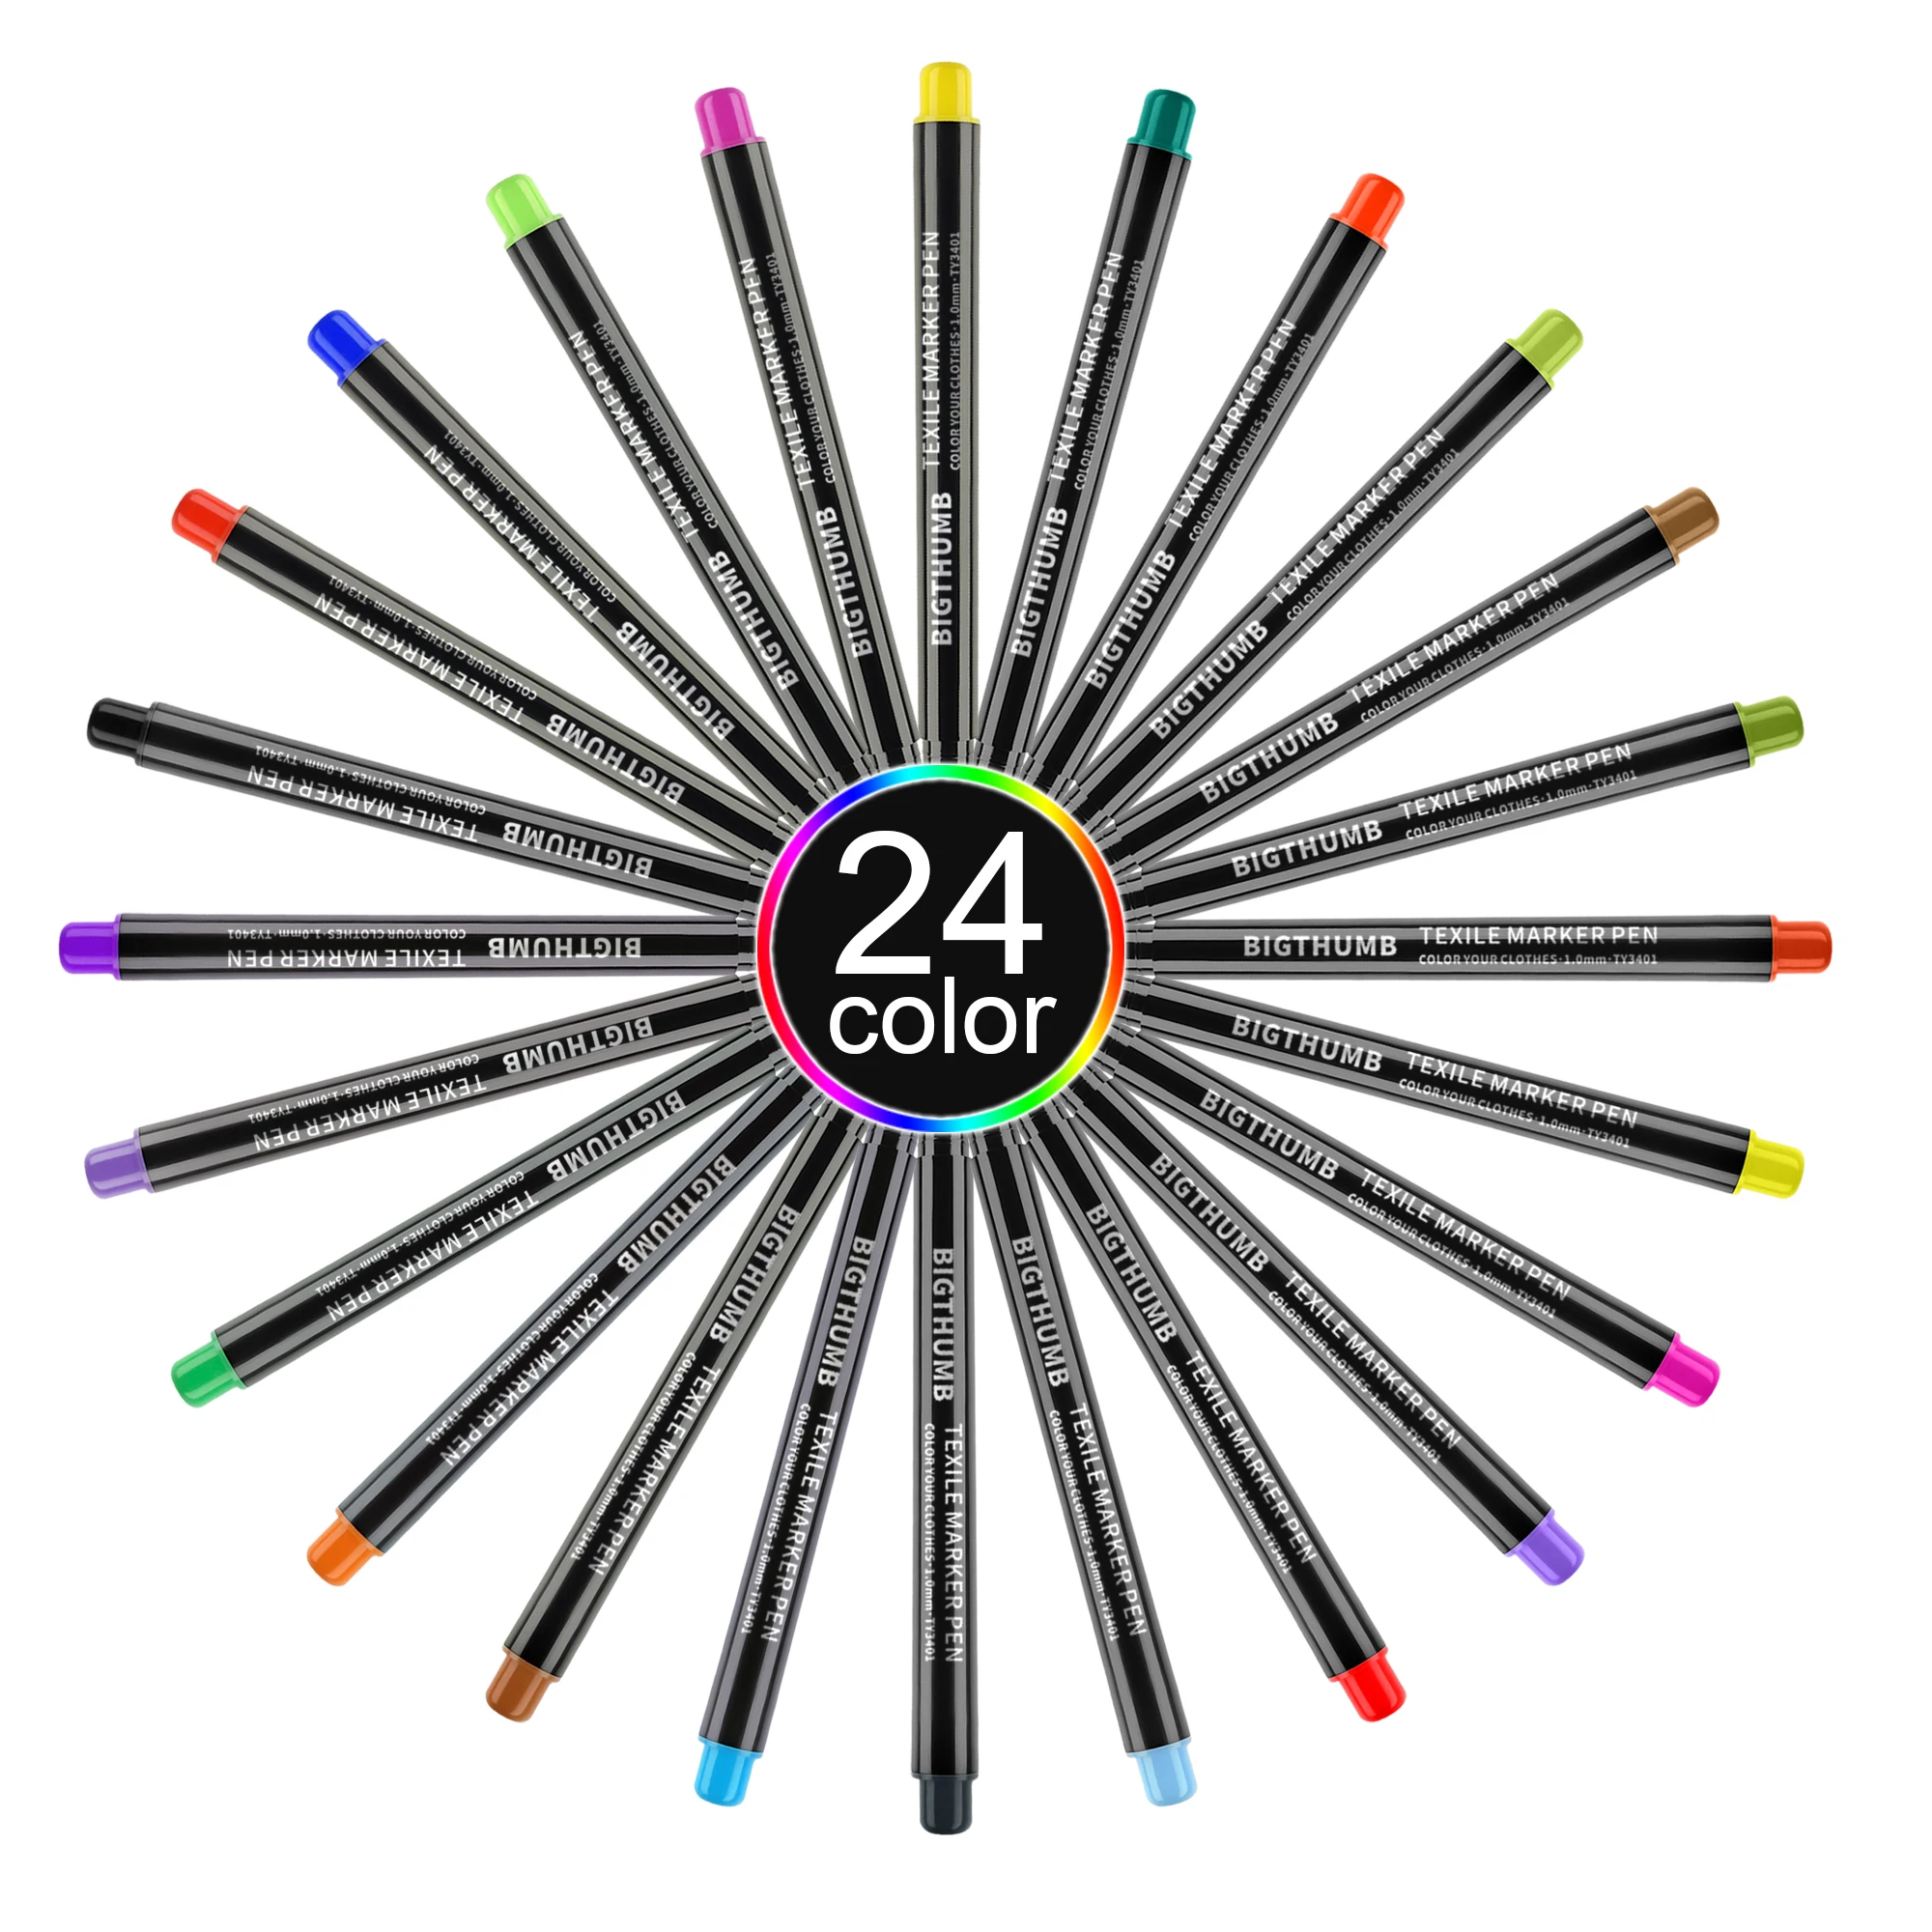 25colors Fabric Marker for Baby Clothes Canvas Fabric Upholstery T Shirts Shoe Clothing Paint Fabric Pens for Clothes